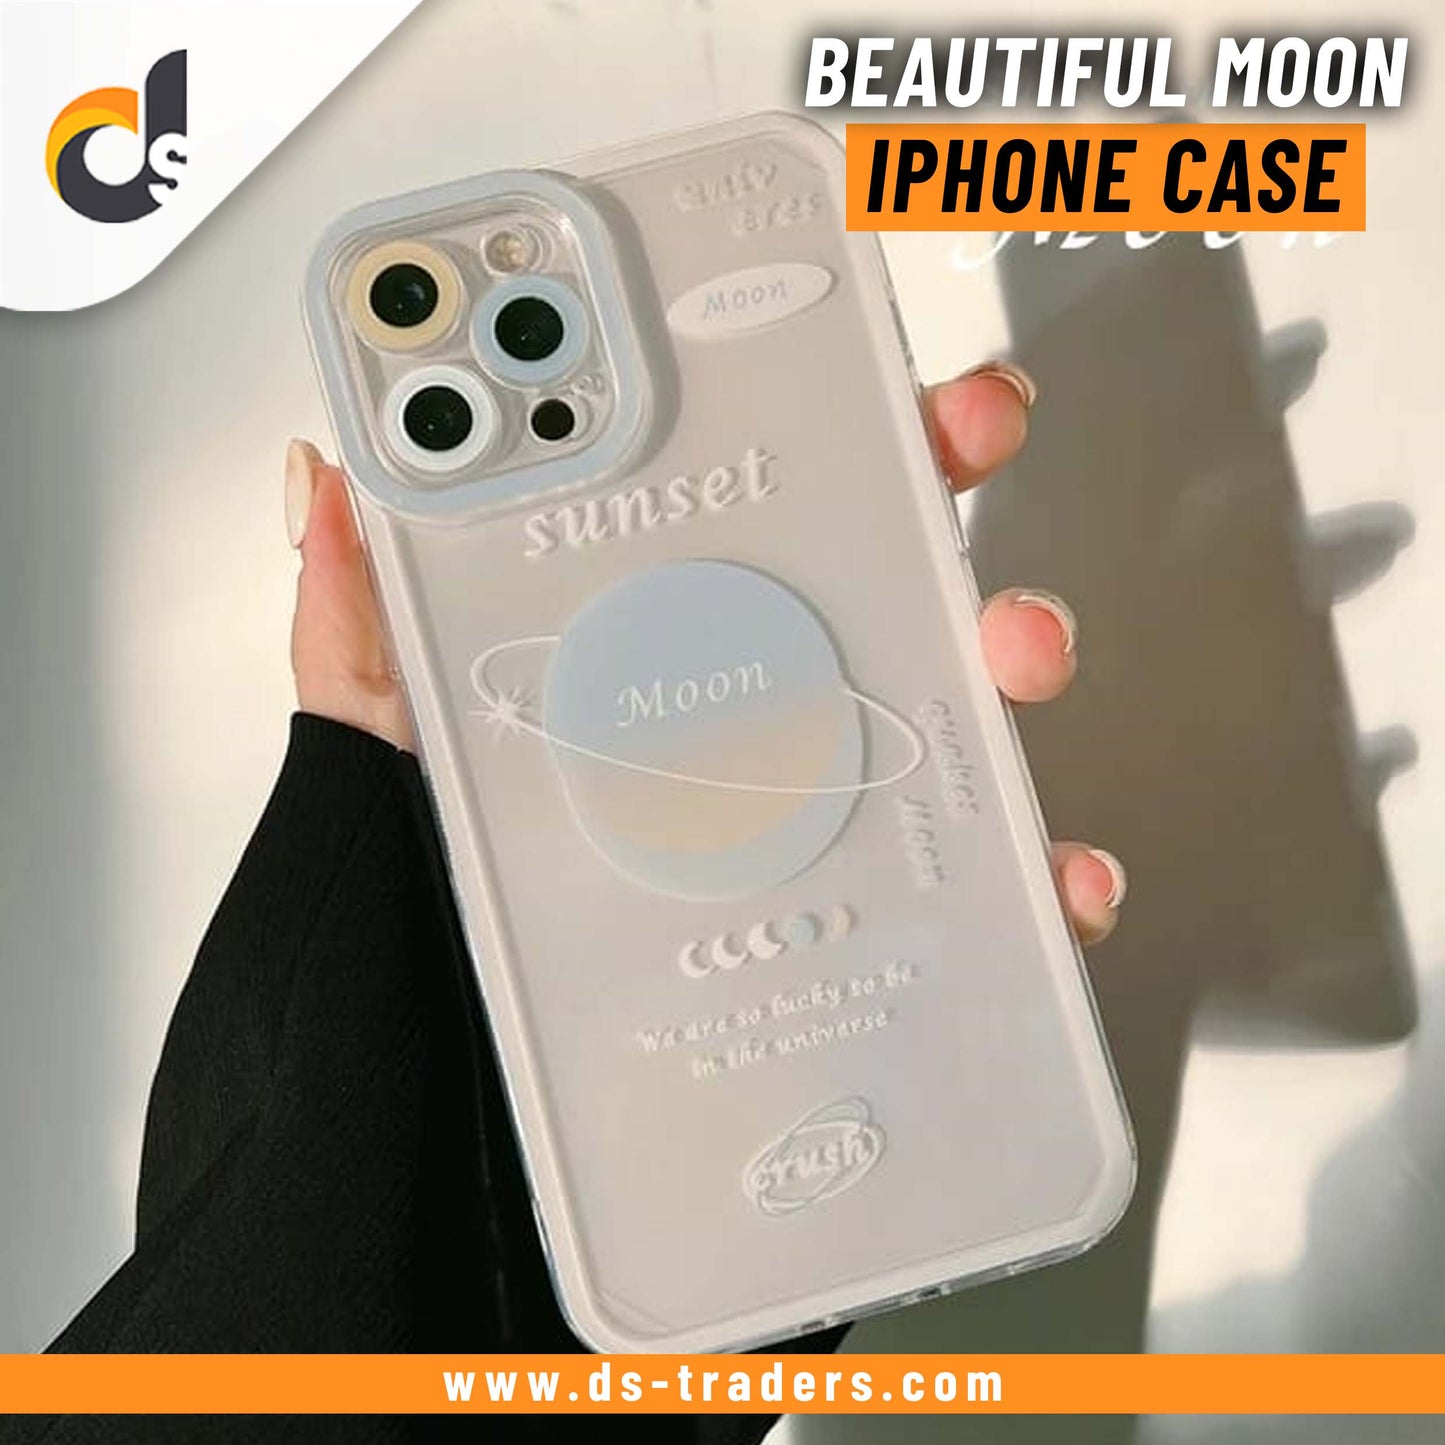 Beautiful Moon Design - iPhone Back Case Only